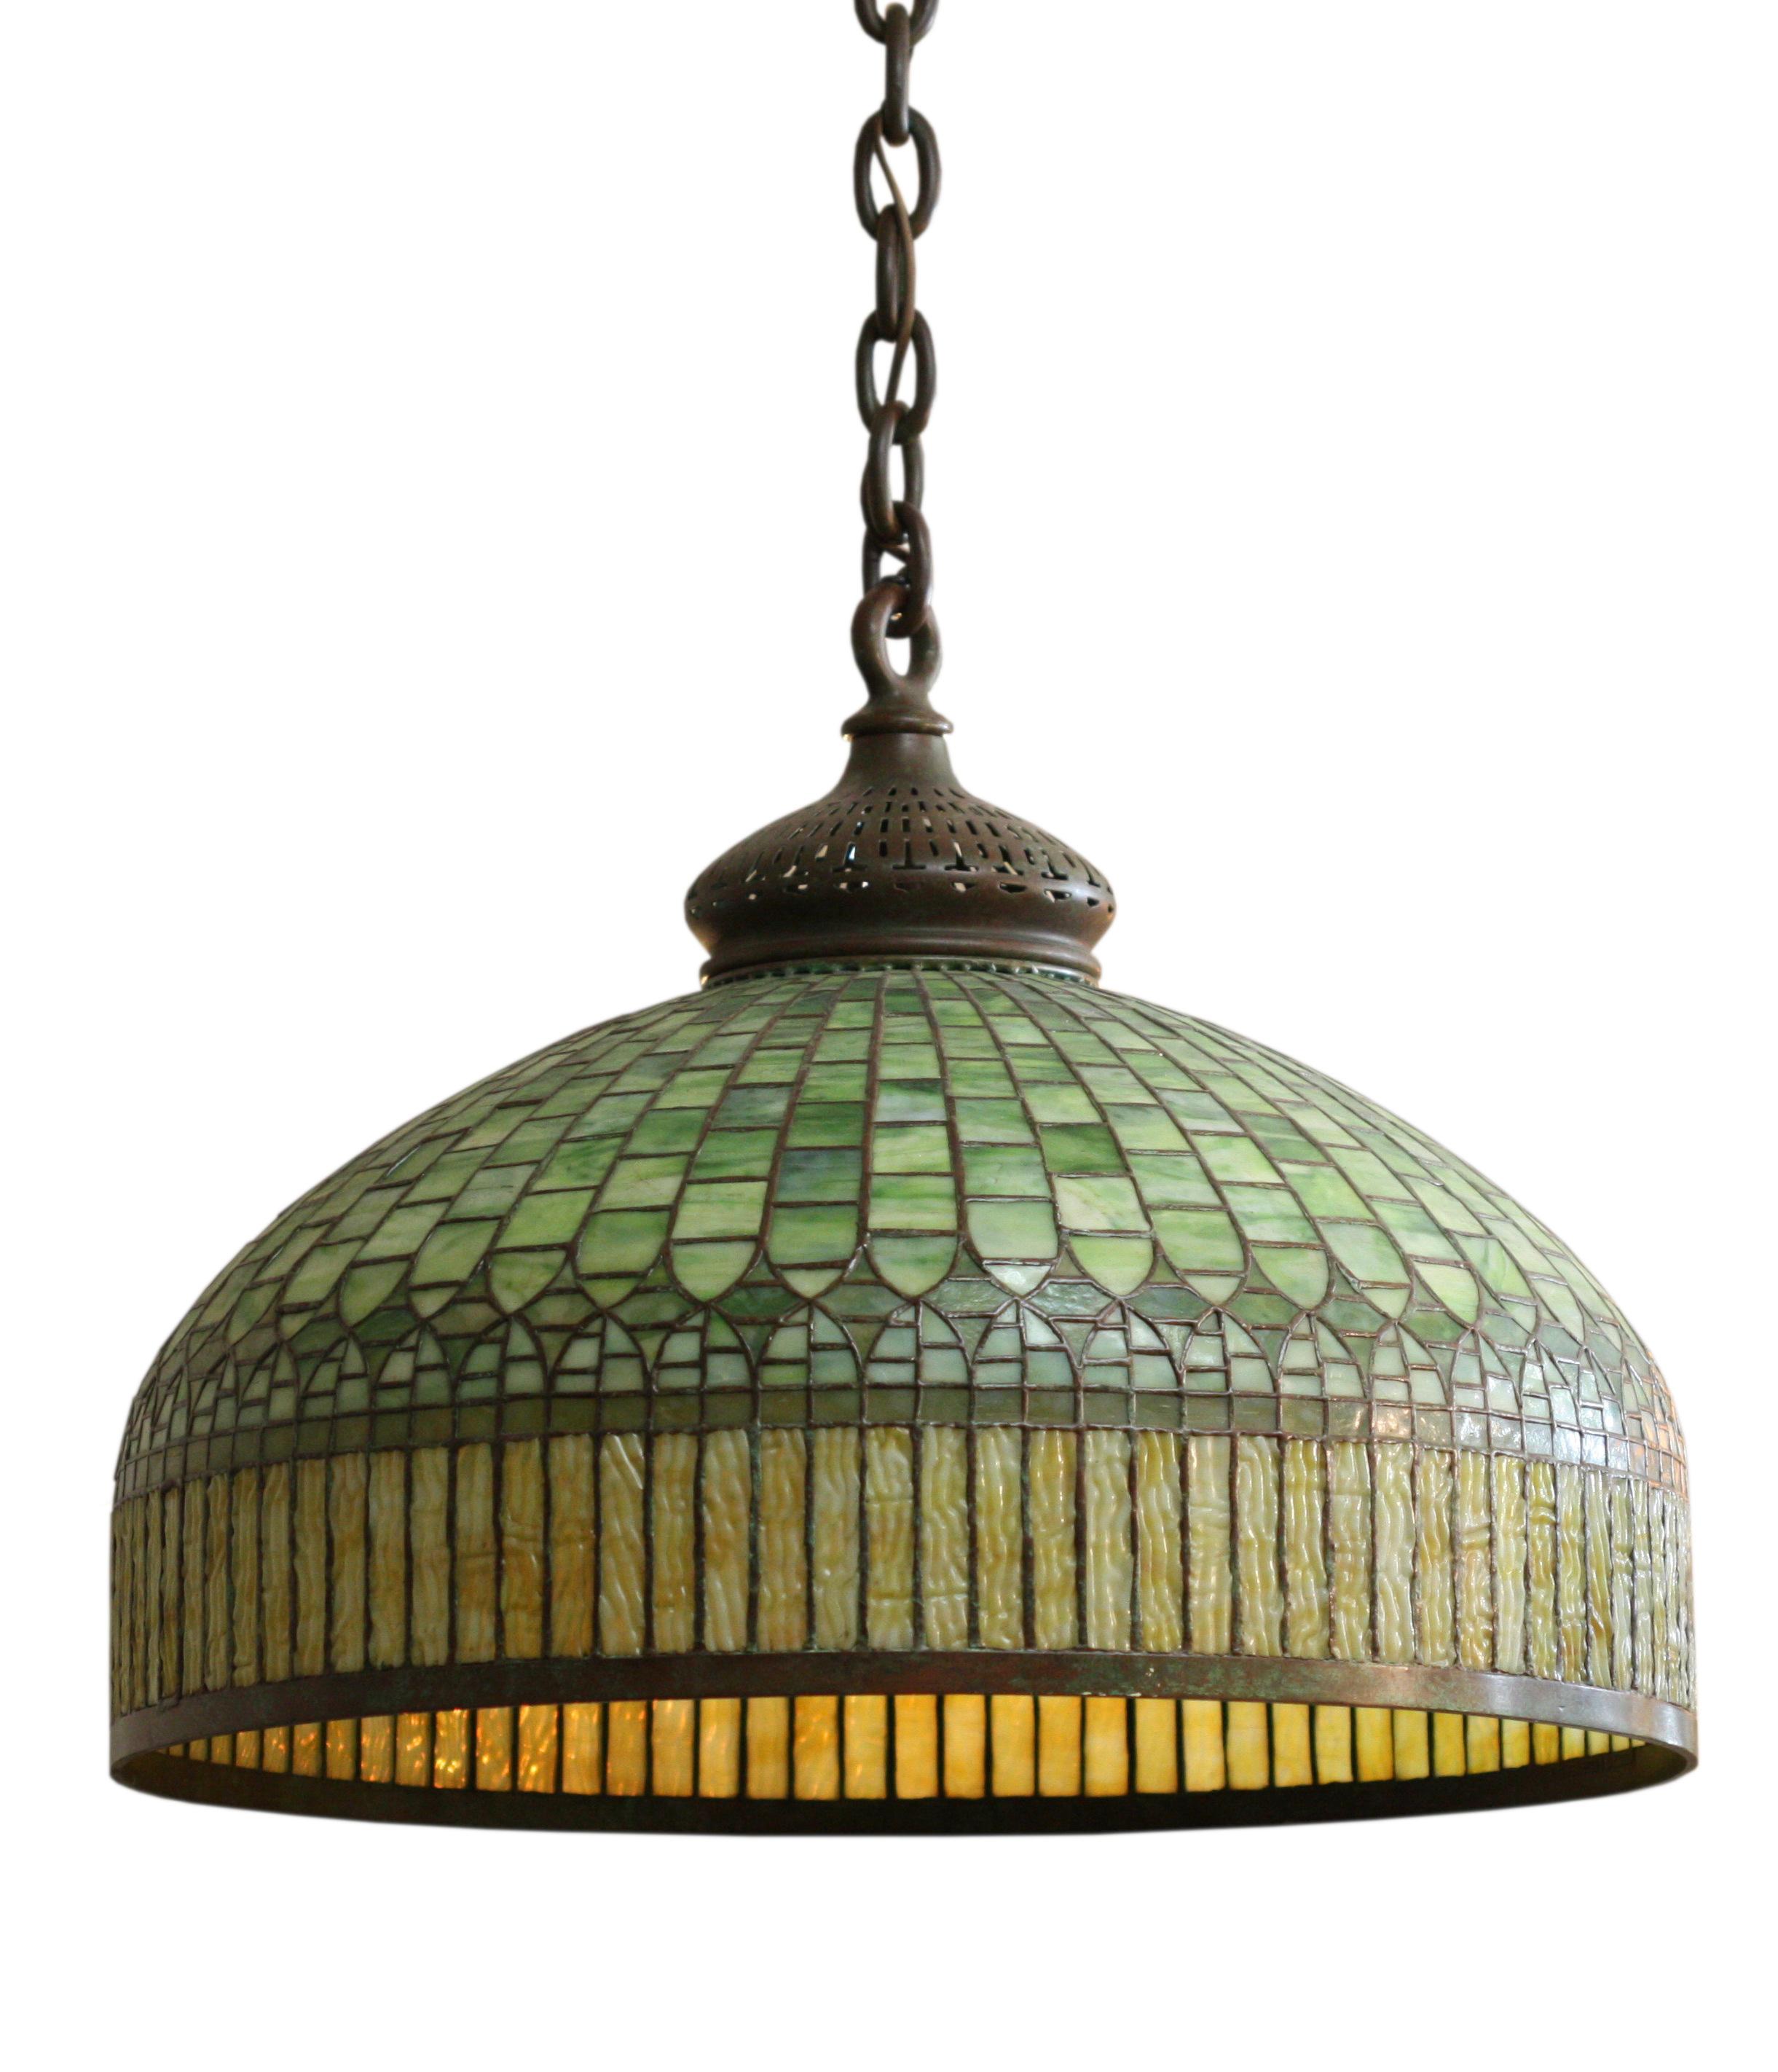 Glass 'Curtain Border' Chandelier, Stamped Tiffany Studios, Christie's NY Provenance For Sale